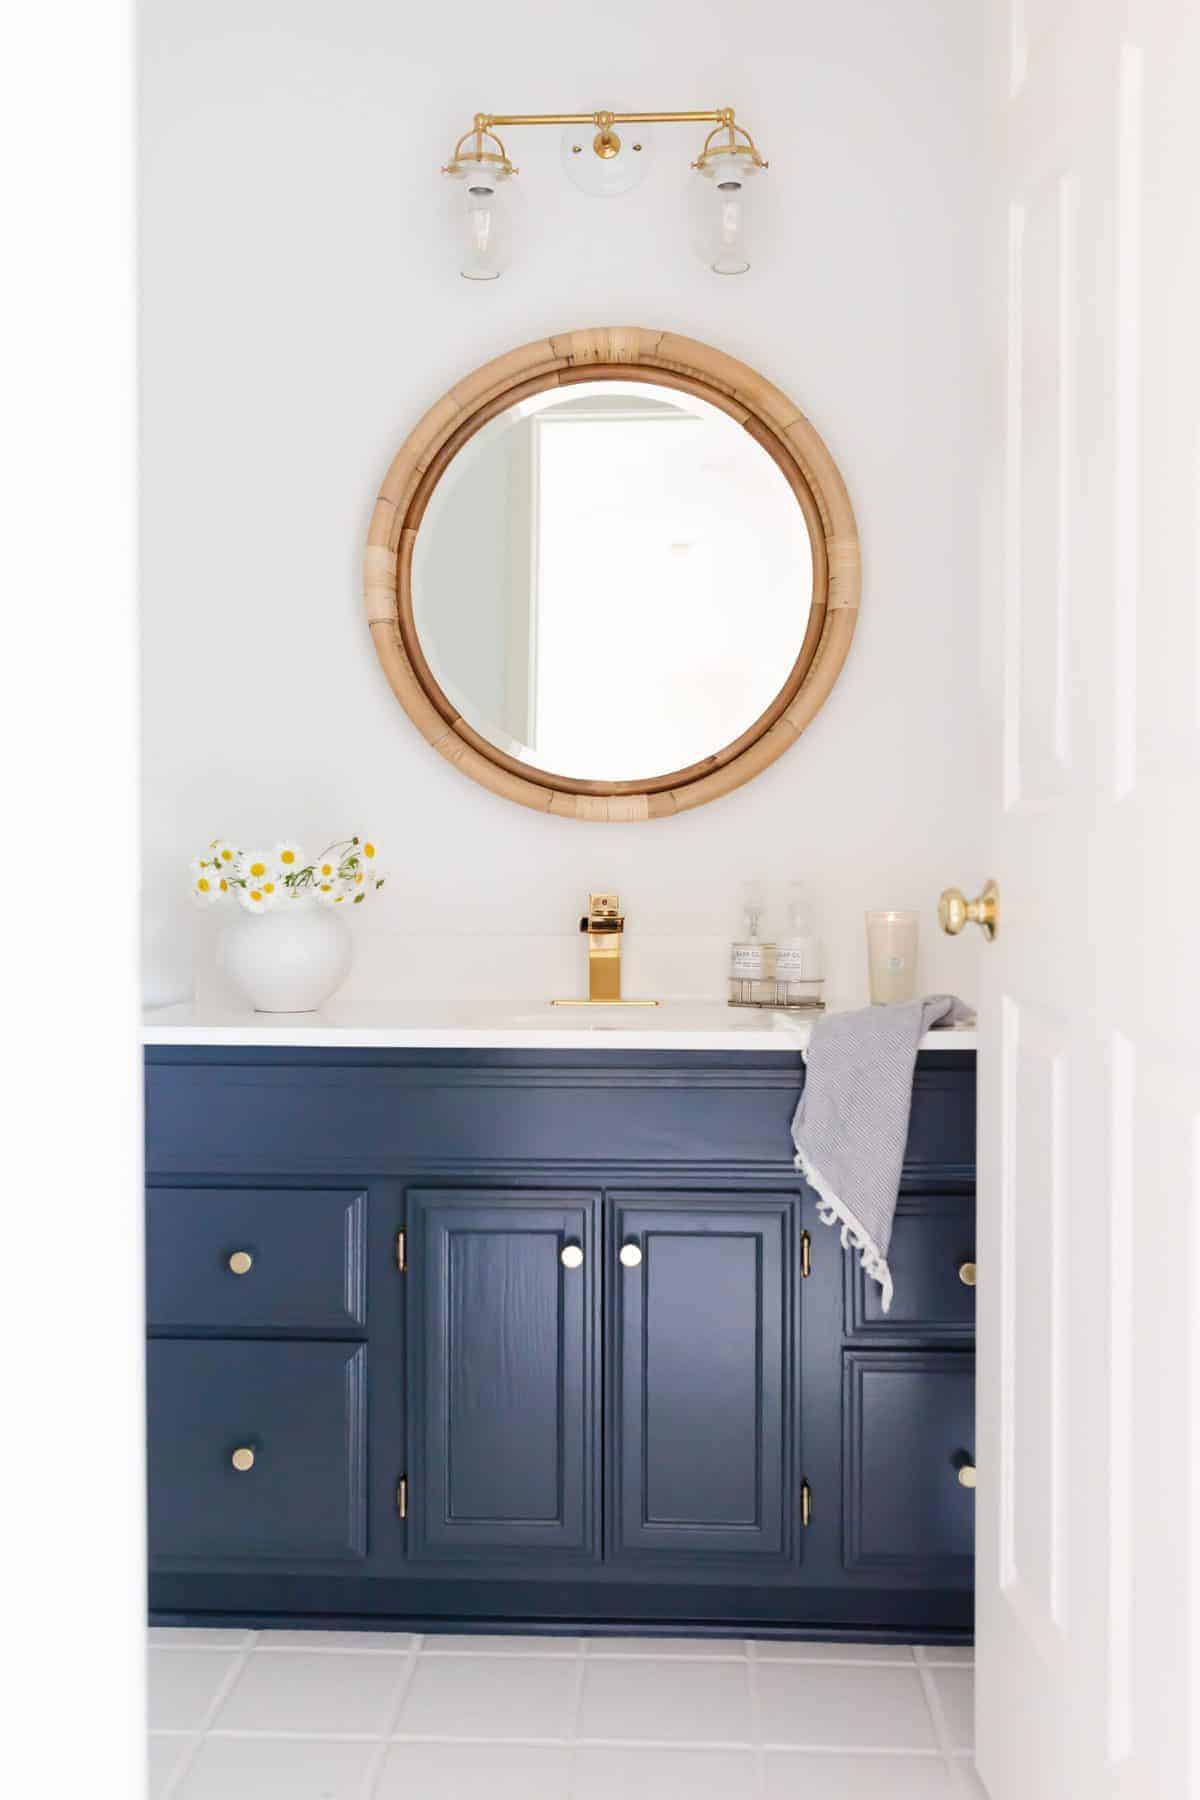 A white bathroom with a round rattan mirror and a dark blue vanity.